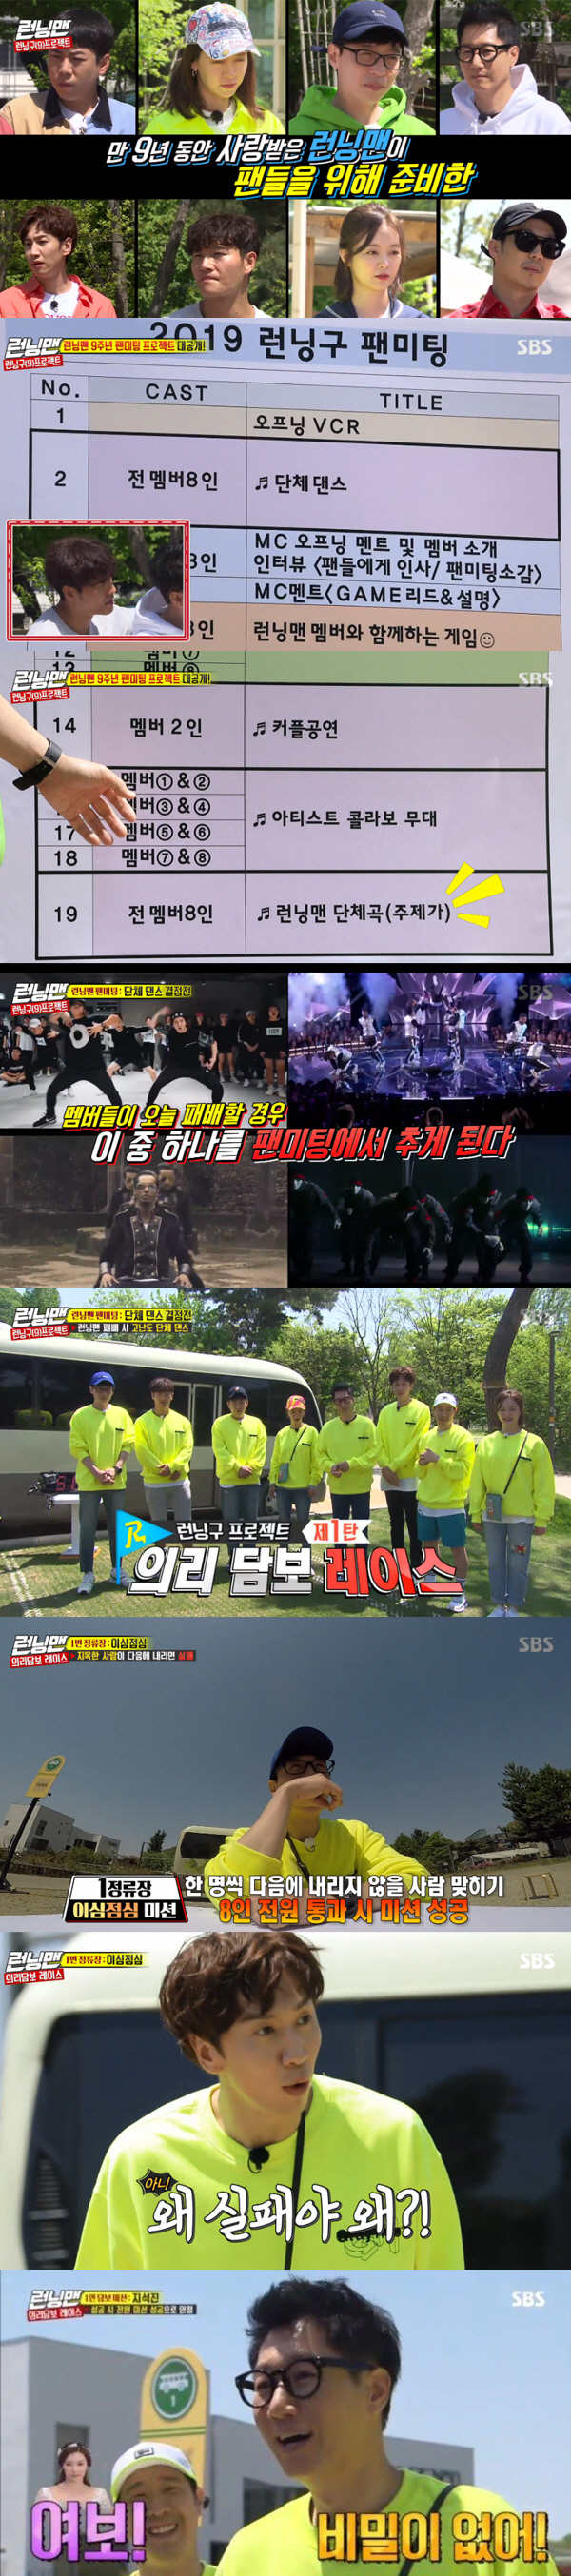 <p>19 broadcast of SBS Running Manmembers 9 anniversary of the domestic fans for Running Man Love Without Love (Live at Summer Vacation/08 - running research projectStone.</p><p>9 years after the first domestic fan meeting held to members is Love Without Love (Live at Summer Vacation/08 CUE sheet configuration and with a fierce Battle then unfolded.</p><p>The first members of the group dance two and secured the race unfolded. 1 the first stop on The Mission is the focal point, 8 power over and The Mission to progress. But then I not a person fit, my foot fit, the initial fit on the back failed. This in analysis with the collateral as determined. With emergency cash, passbook and password of the use, ever was the biggest lie now wife on the phone to say. But JI-Seok is troubled..... The Mission to give a laugh.</p><p> The water in the balloons to progress the game, 8 power a water balloon and receive if successful. Kim Jong Kook almost brought success as possible in a safe toss for the best among the hole of the support seat with a sheep and more like a thrown water balloon and receive data was successful.</p><p>This in 3 of The Mission in success for members is Love Without Love (Live at Summer Vacation/08 at their desired cool dance to.</p>